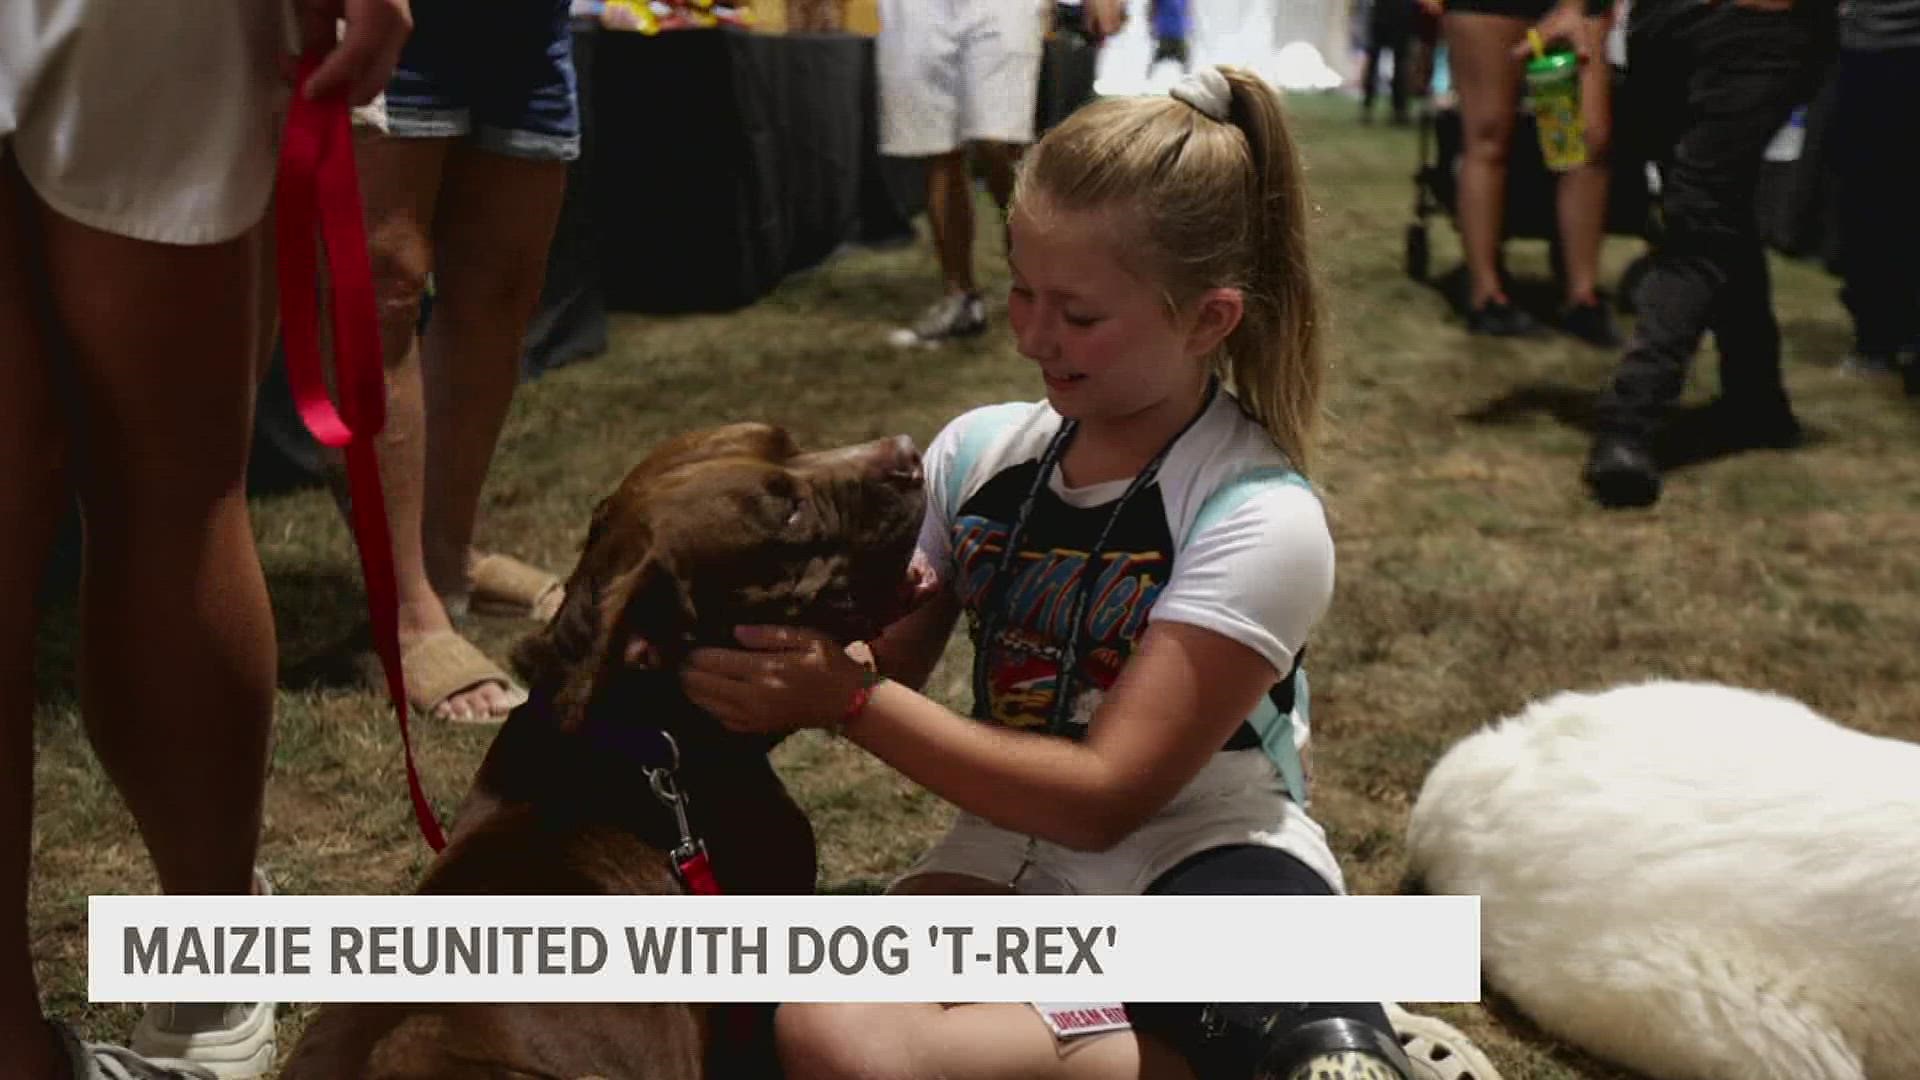 On a trip to Connecticut, Maizie Hosch fell in love with a dog named T-Rex. Both can't use one of their legs. A volunteer drove 2000 miles to unite them.